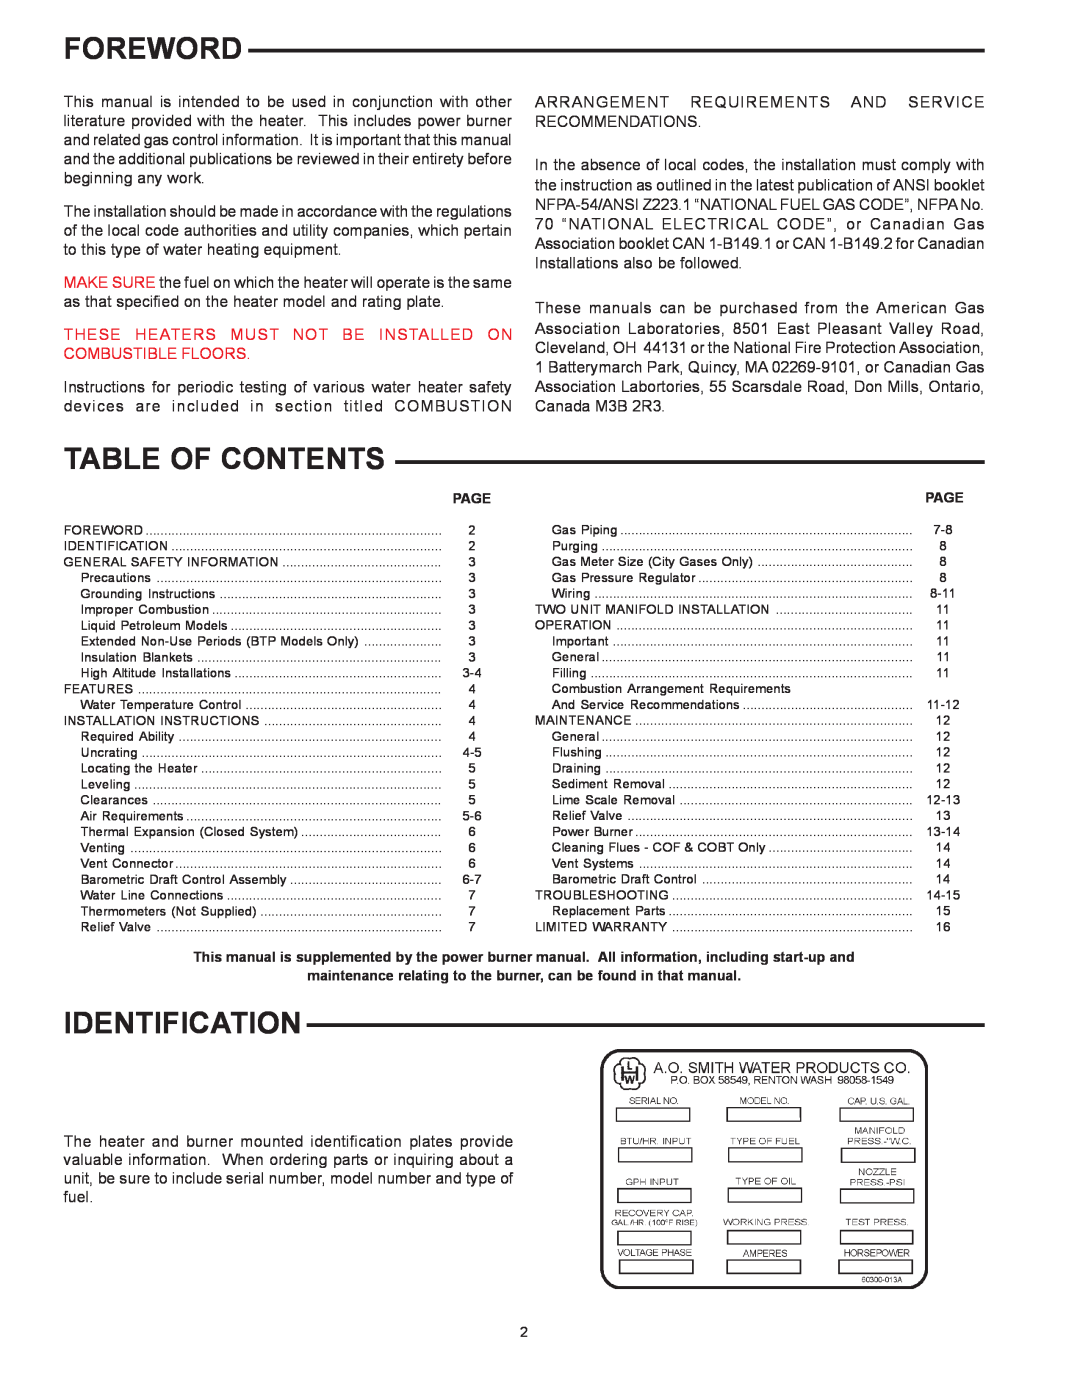 A.O. Smith BTPN Foreword, Table Of Contents, Identification, These Heaters Must Not Be Installed On Combustible Floors 